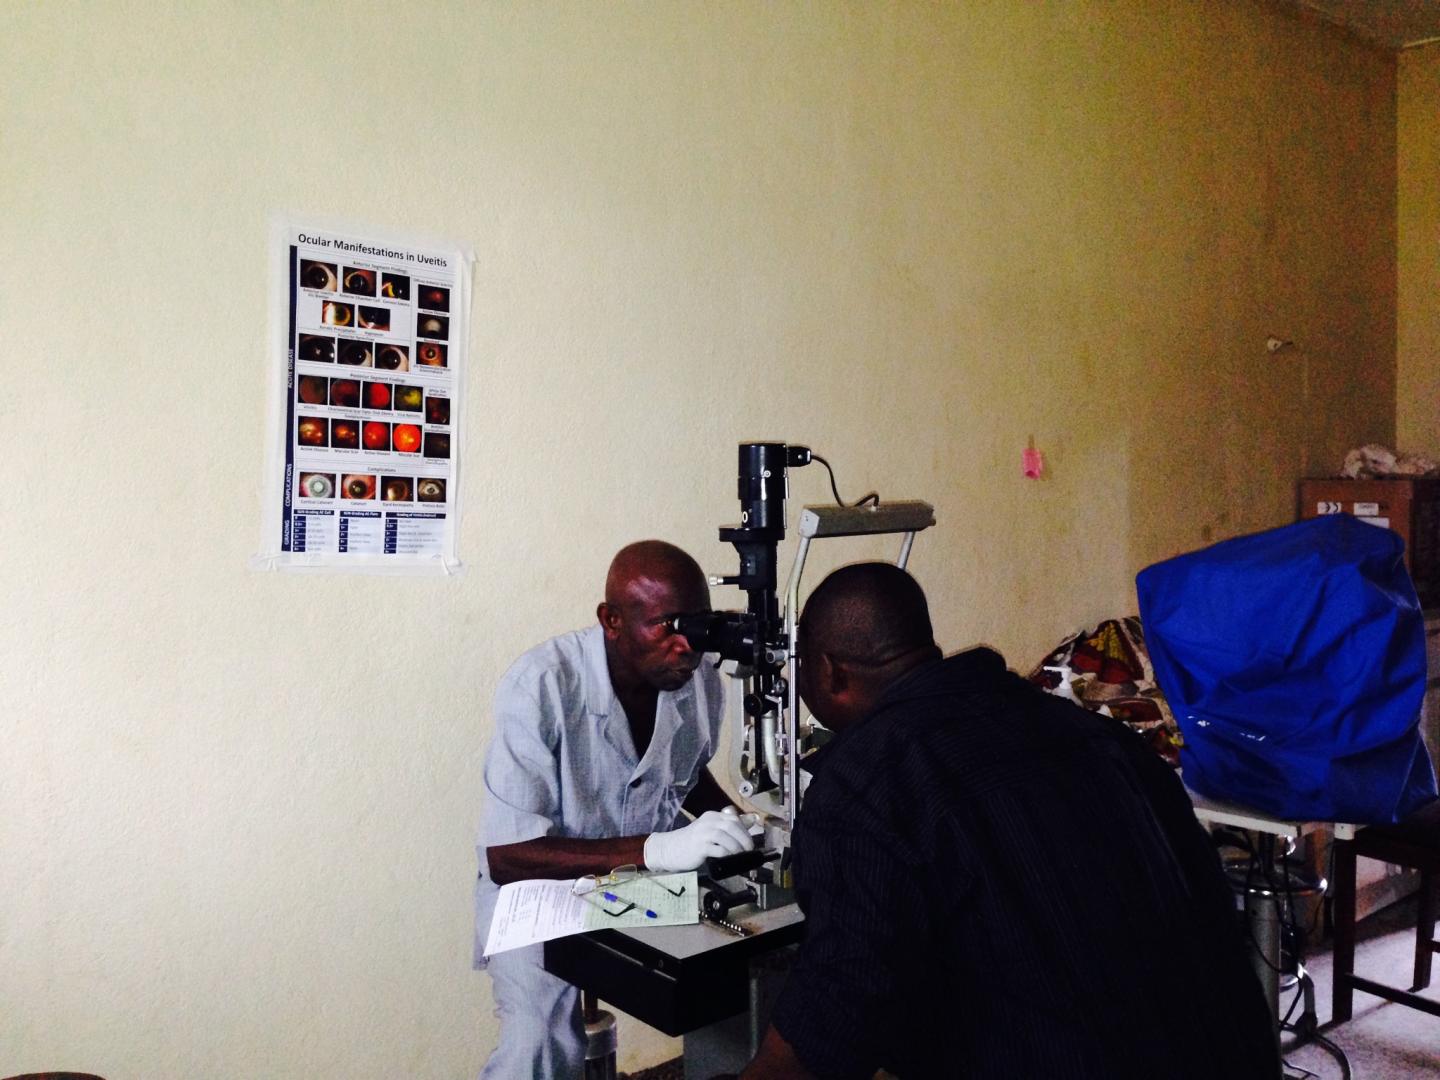 Largest Study of Ebola Survivors Finds They Commonly Report Vision, Hearing, Joint Pain Problems